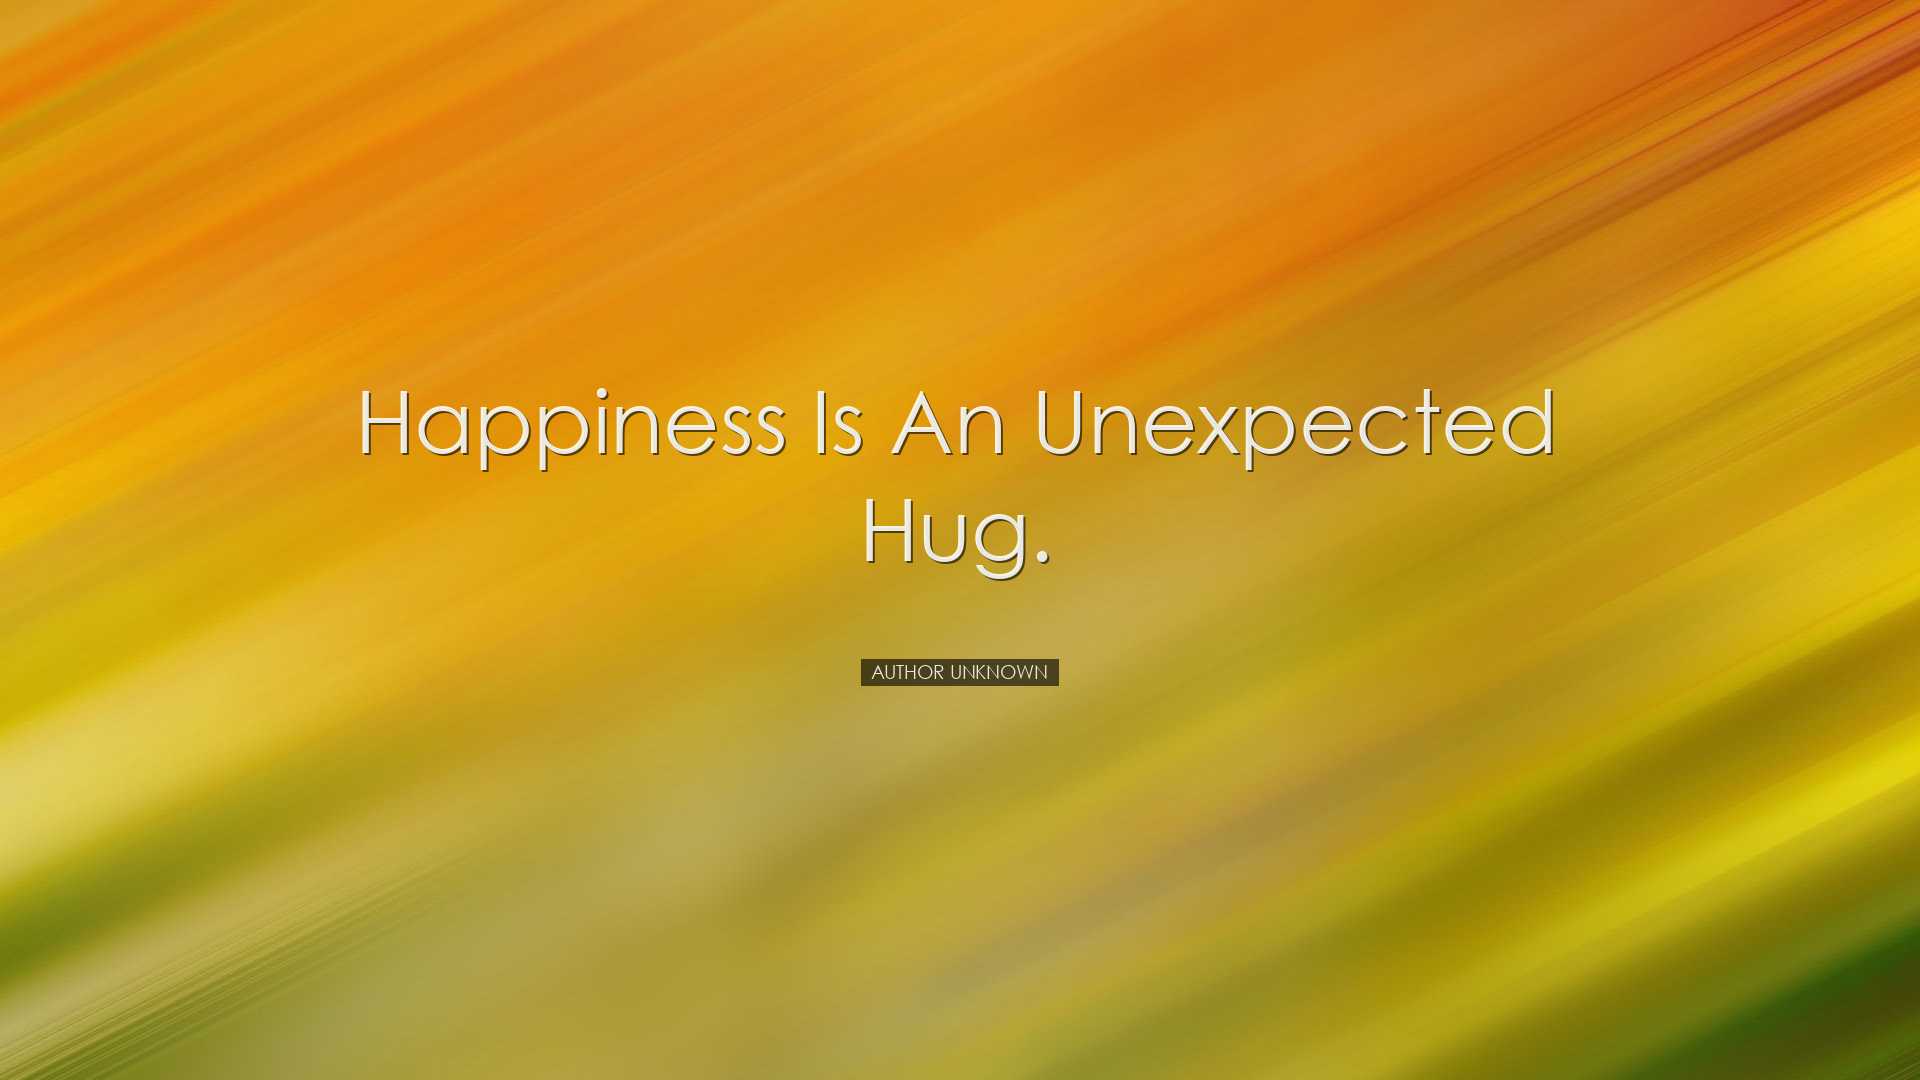 Happiness is an unexpected hug. - Author Unknown